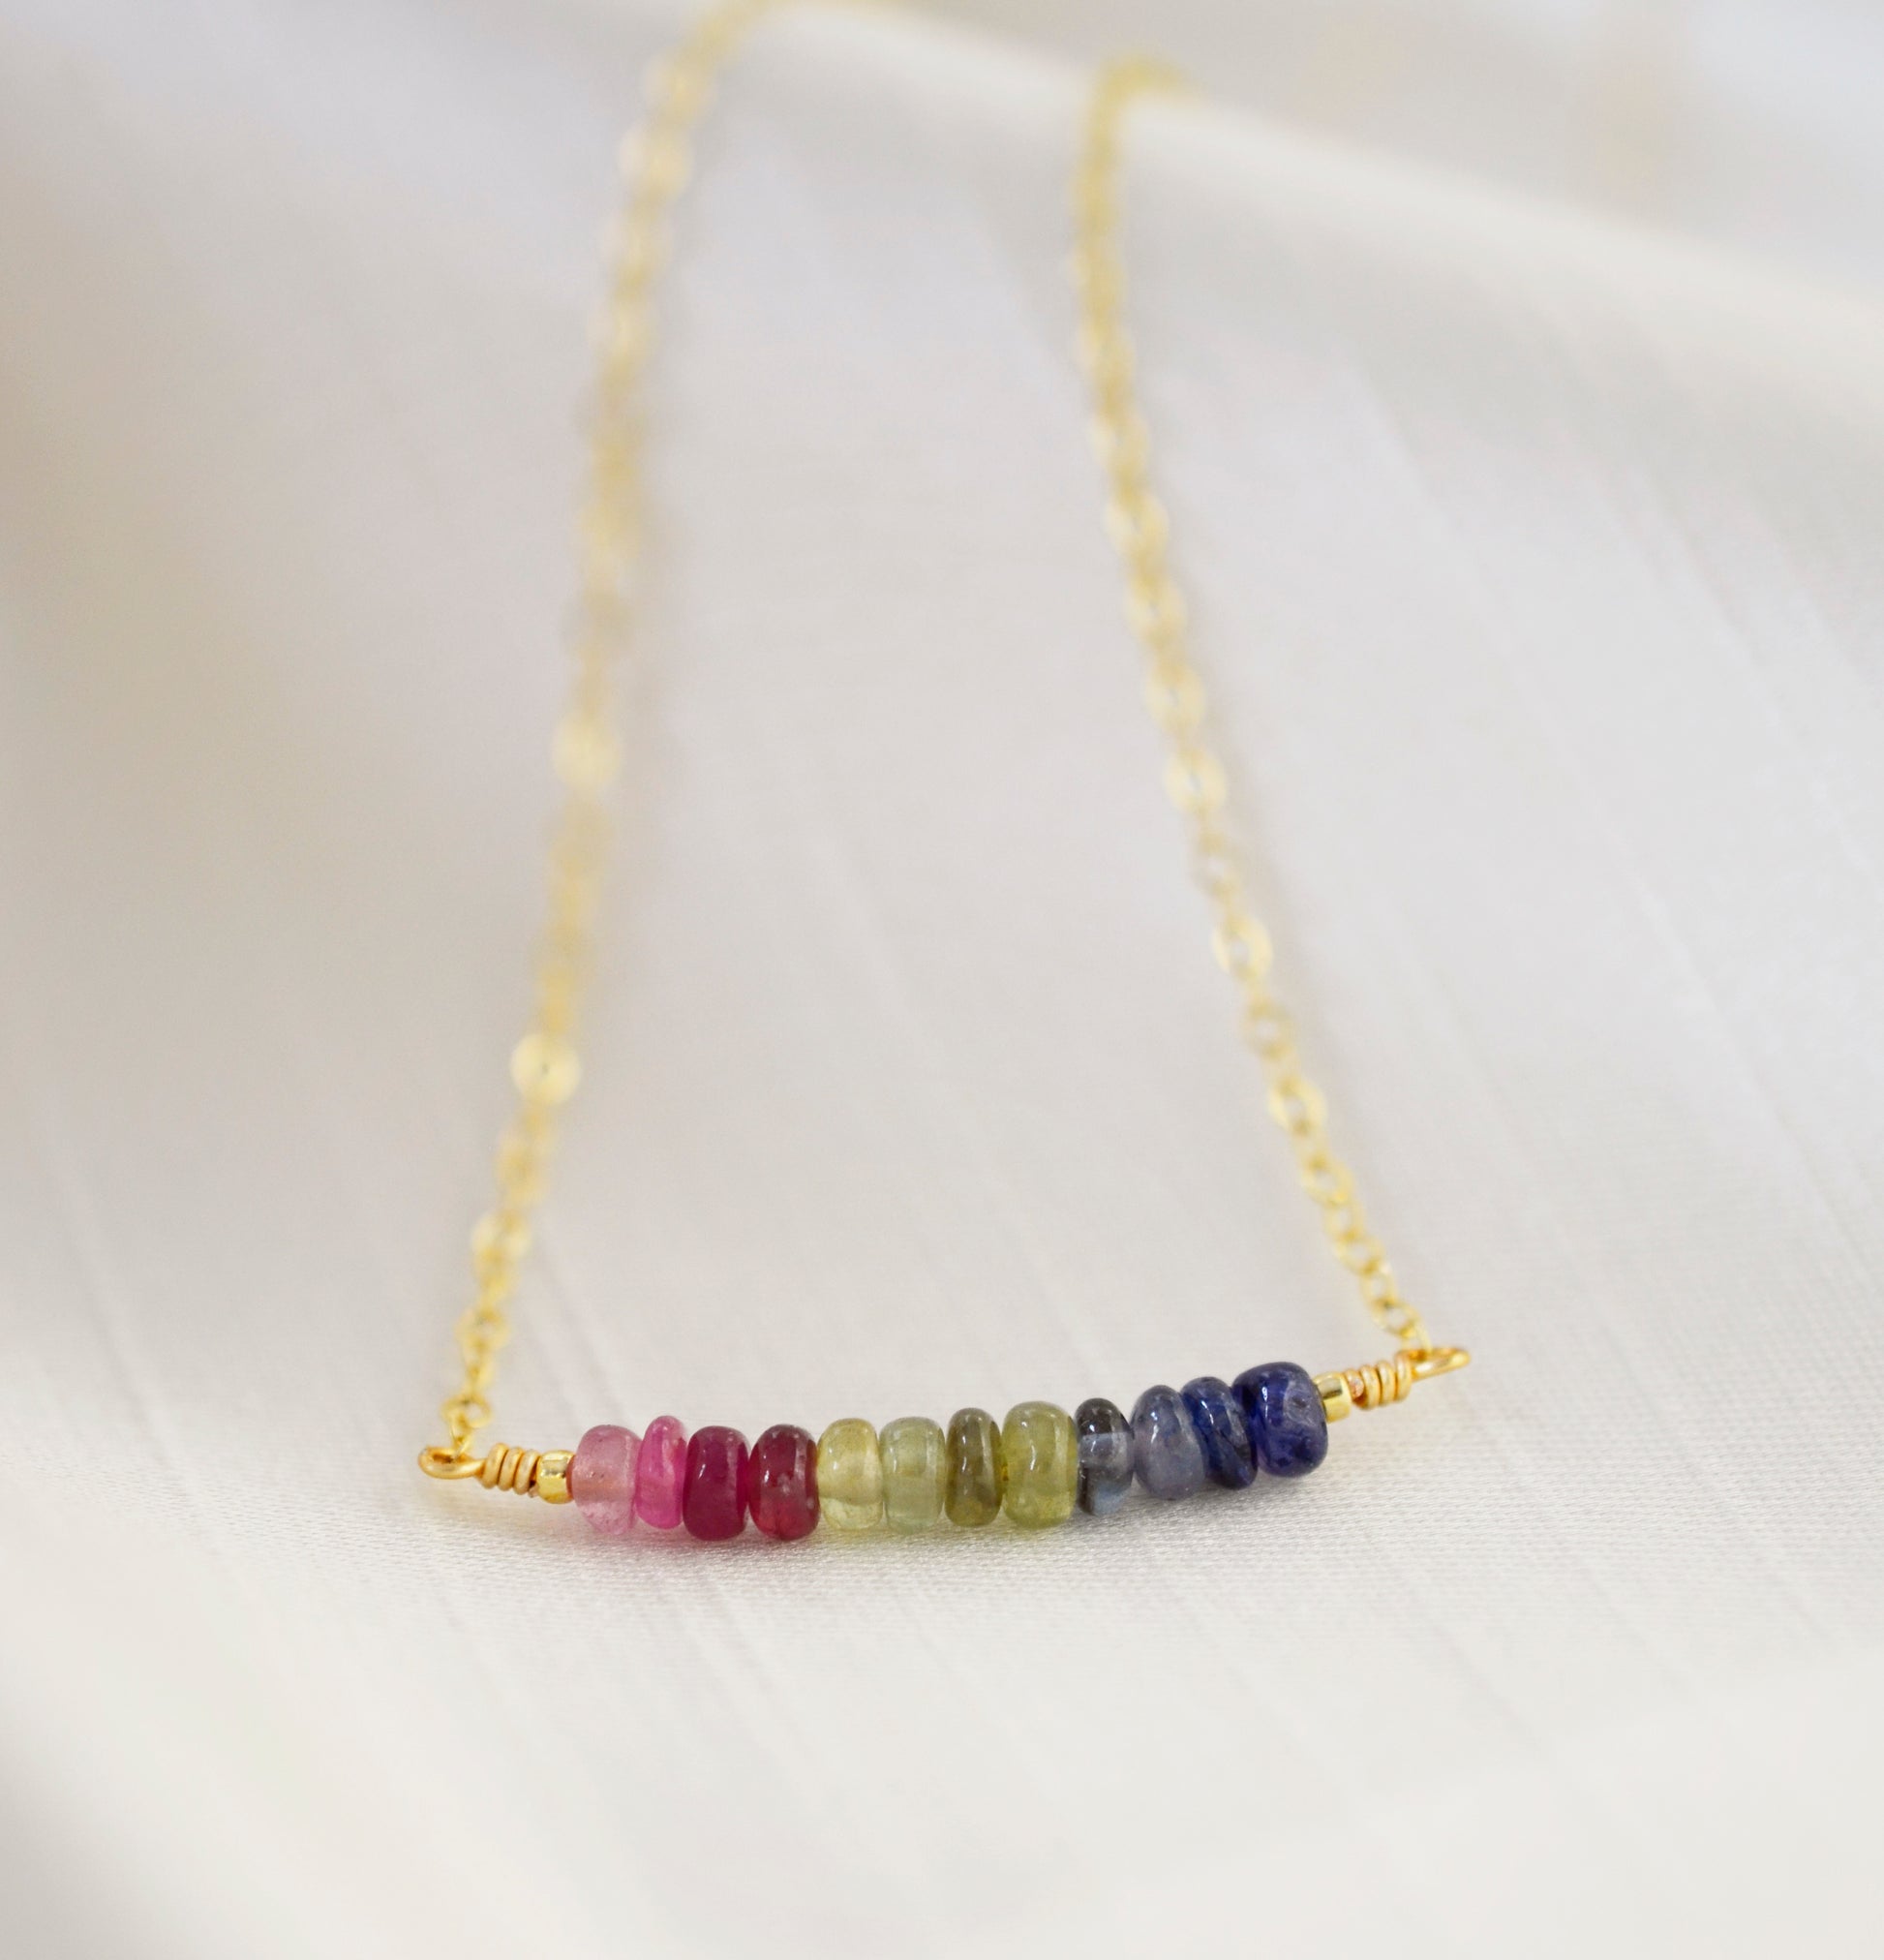 Multi color sapphire necklace. Blue, pink, green, yellow sapphires arranged into a bar pendant. Made in Sterling Silver or Gold Filled.